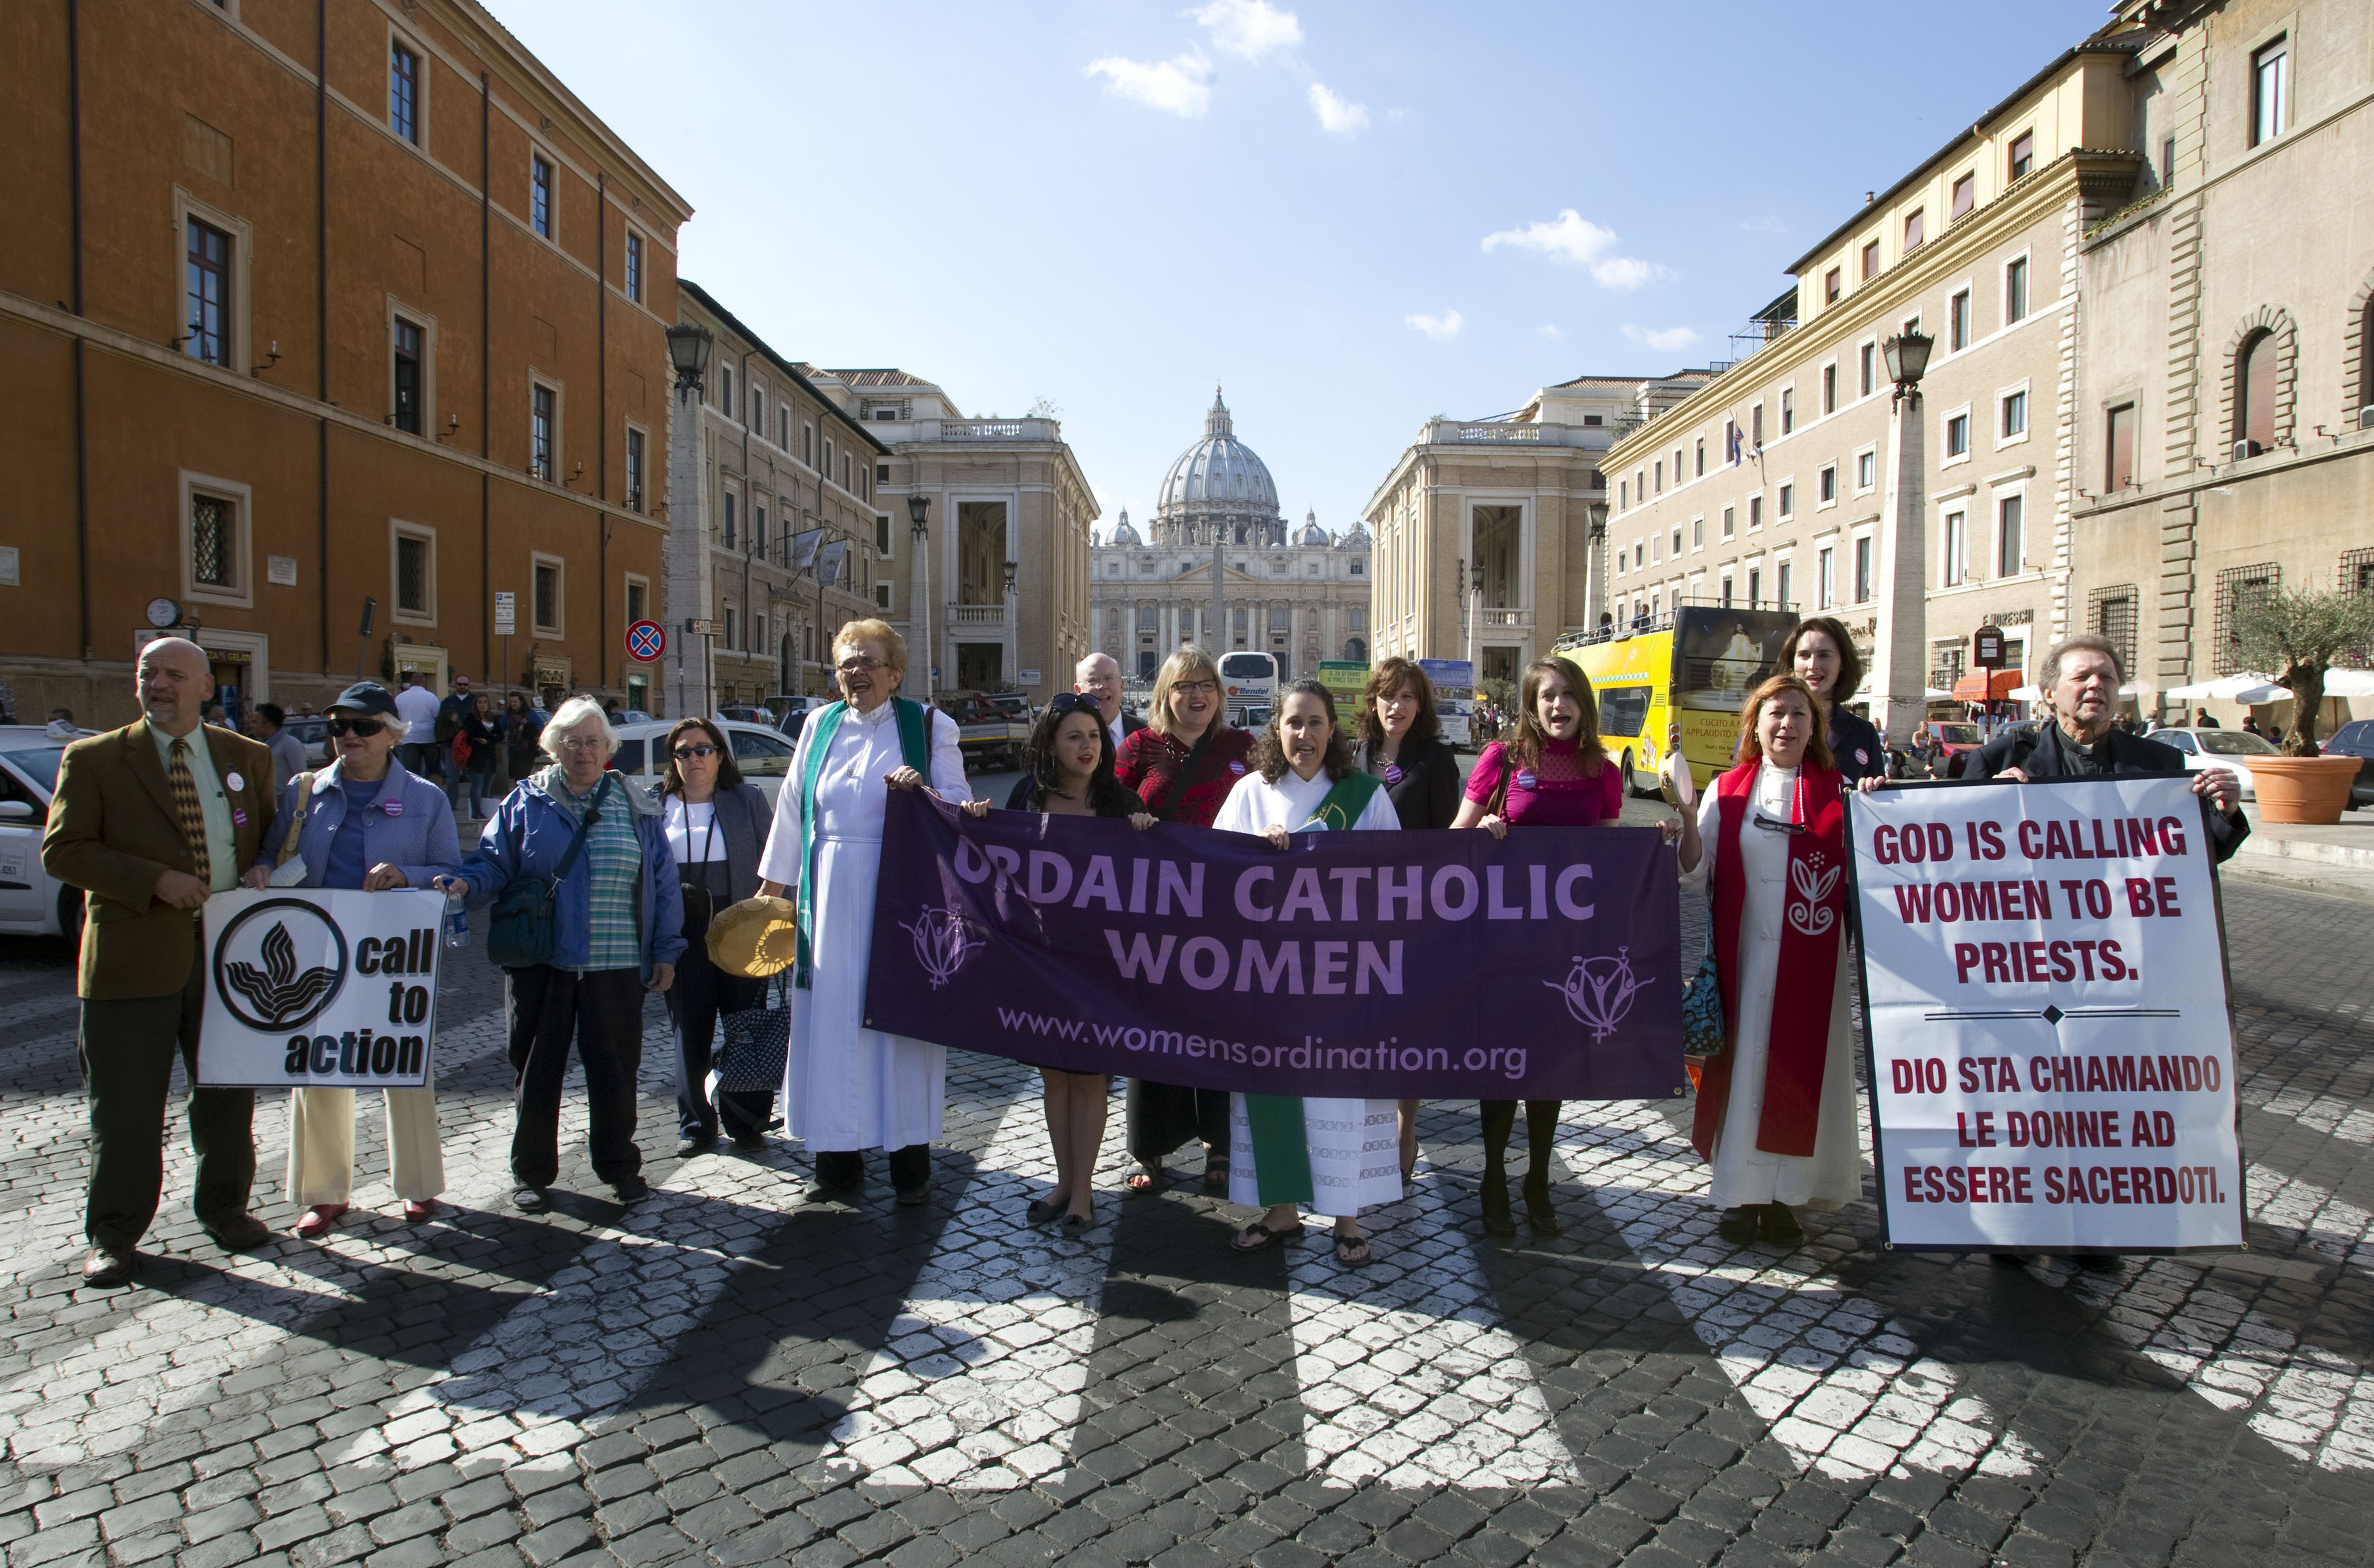 Members of the Women's Ordination Conference group stage a protest in front of St. Peter's Basilica, in Rome, on Oct. 17, 2011. (AP Photo/Andrew Medichini, File)